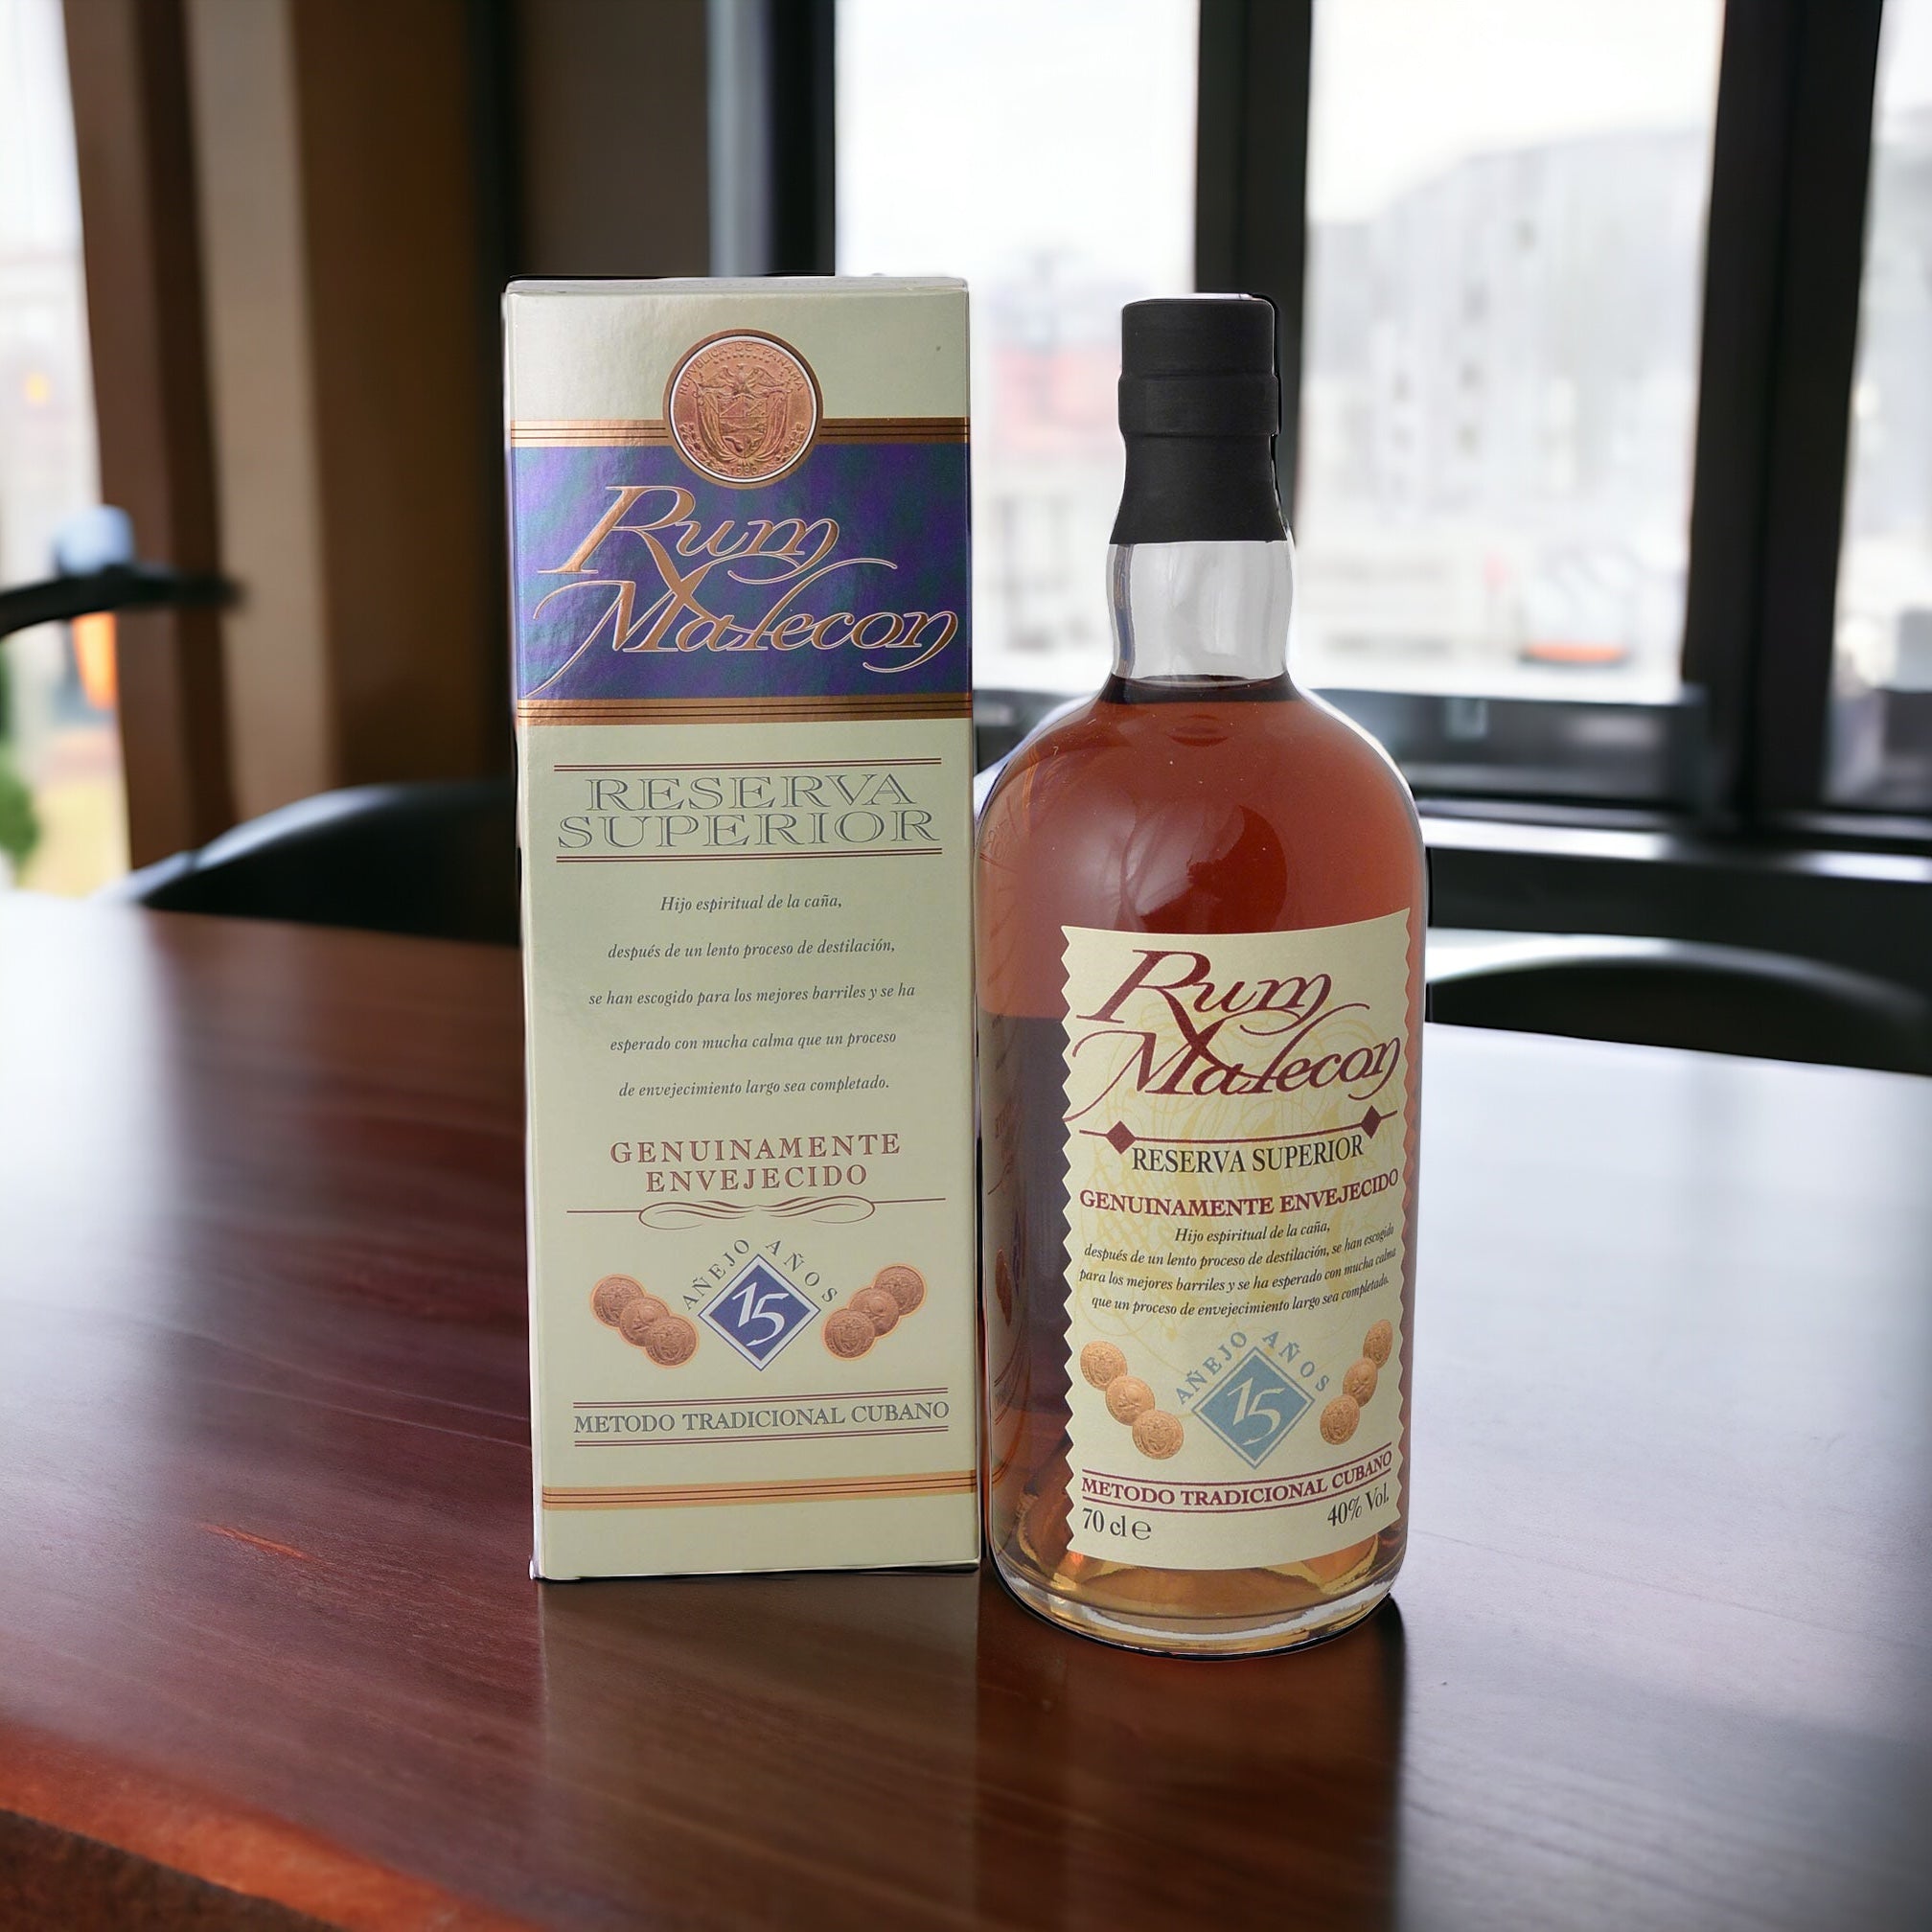 Introducing the Malecon Reserva Superior 15 Anos Rum from Panama